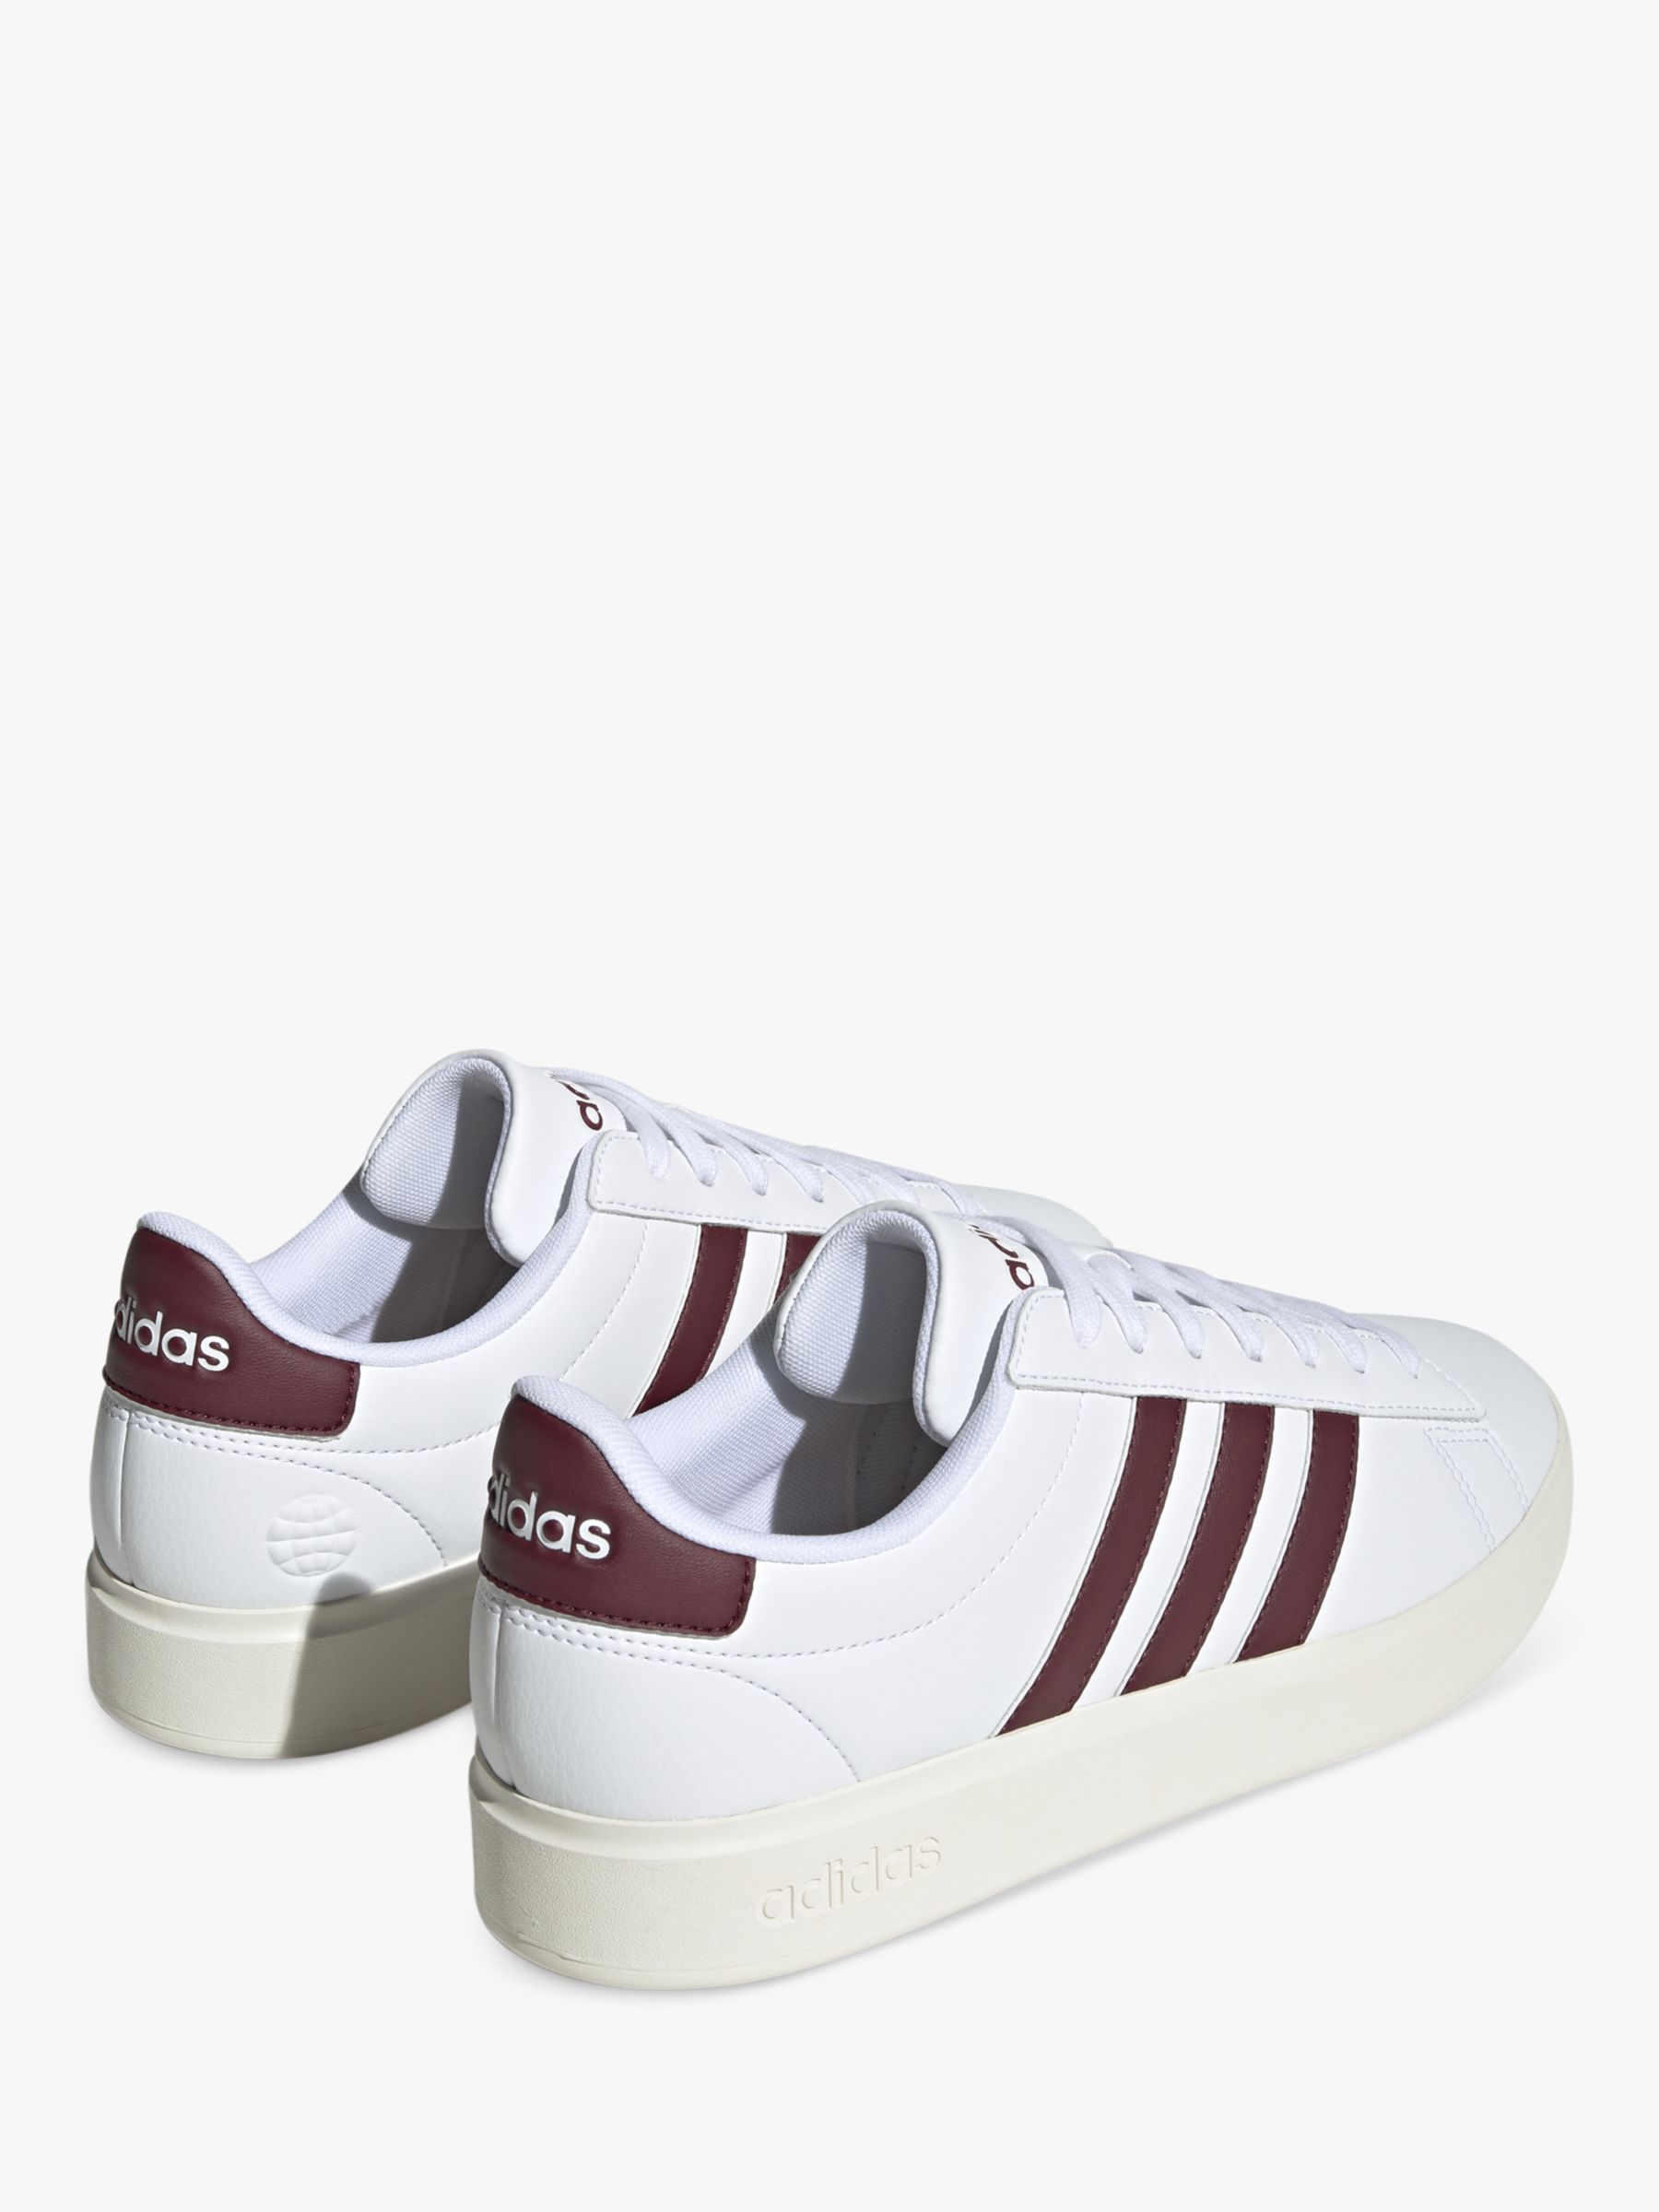 adidas Grand Court 2.0 Trainers, at Lewis & Partners